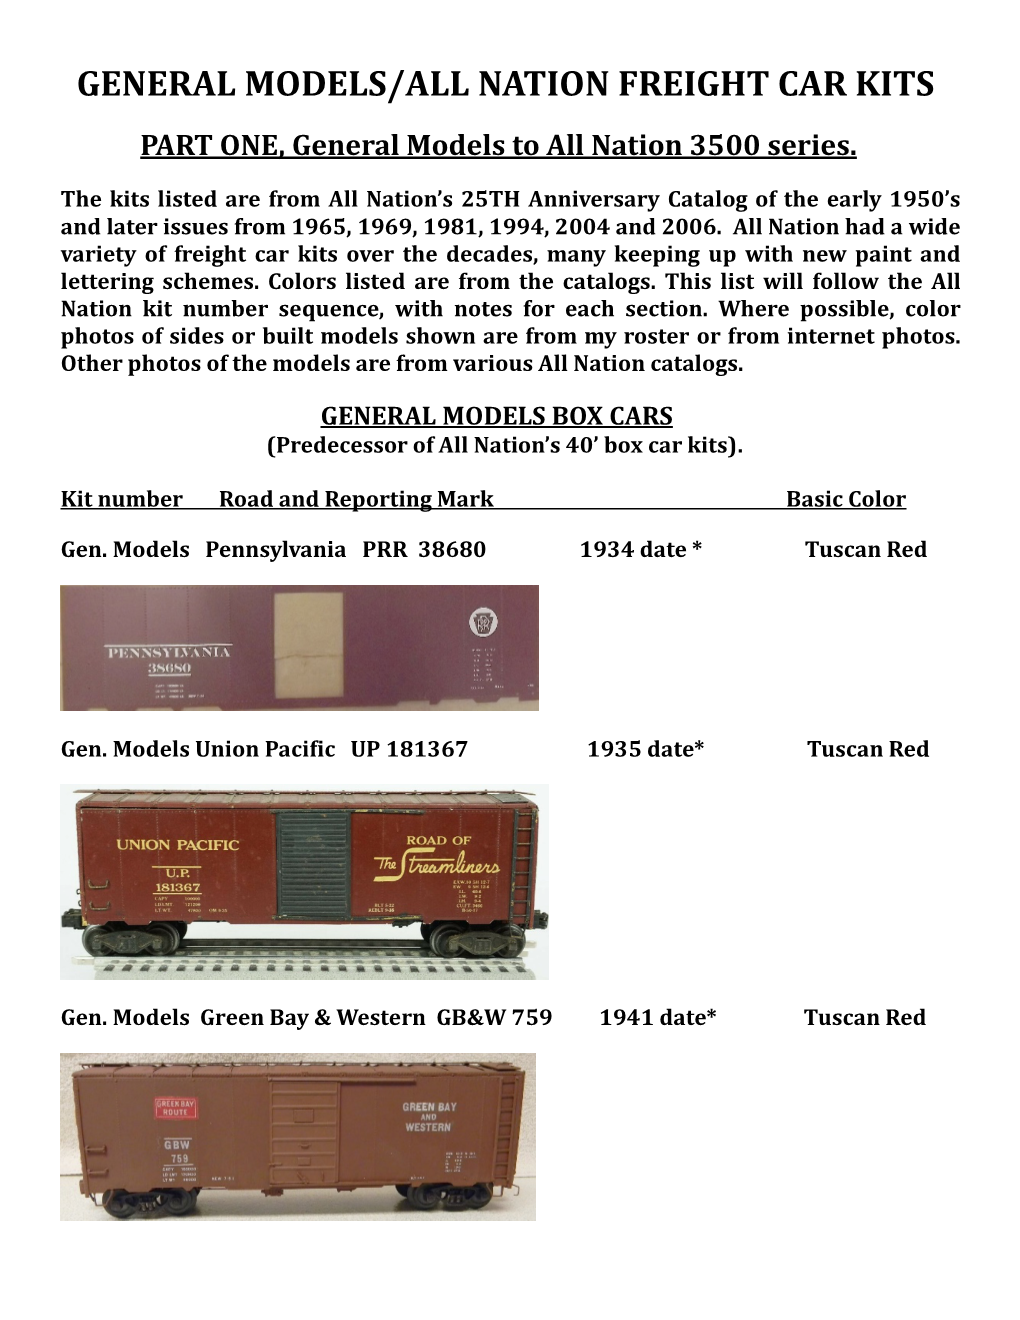 General Models/All Nation Freight Car Kits